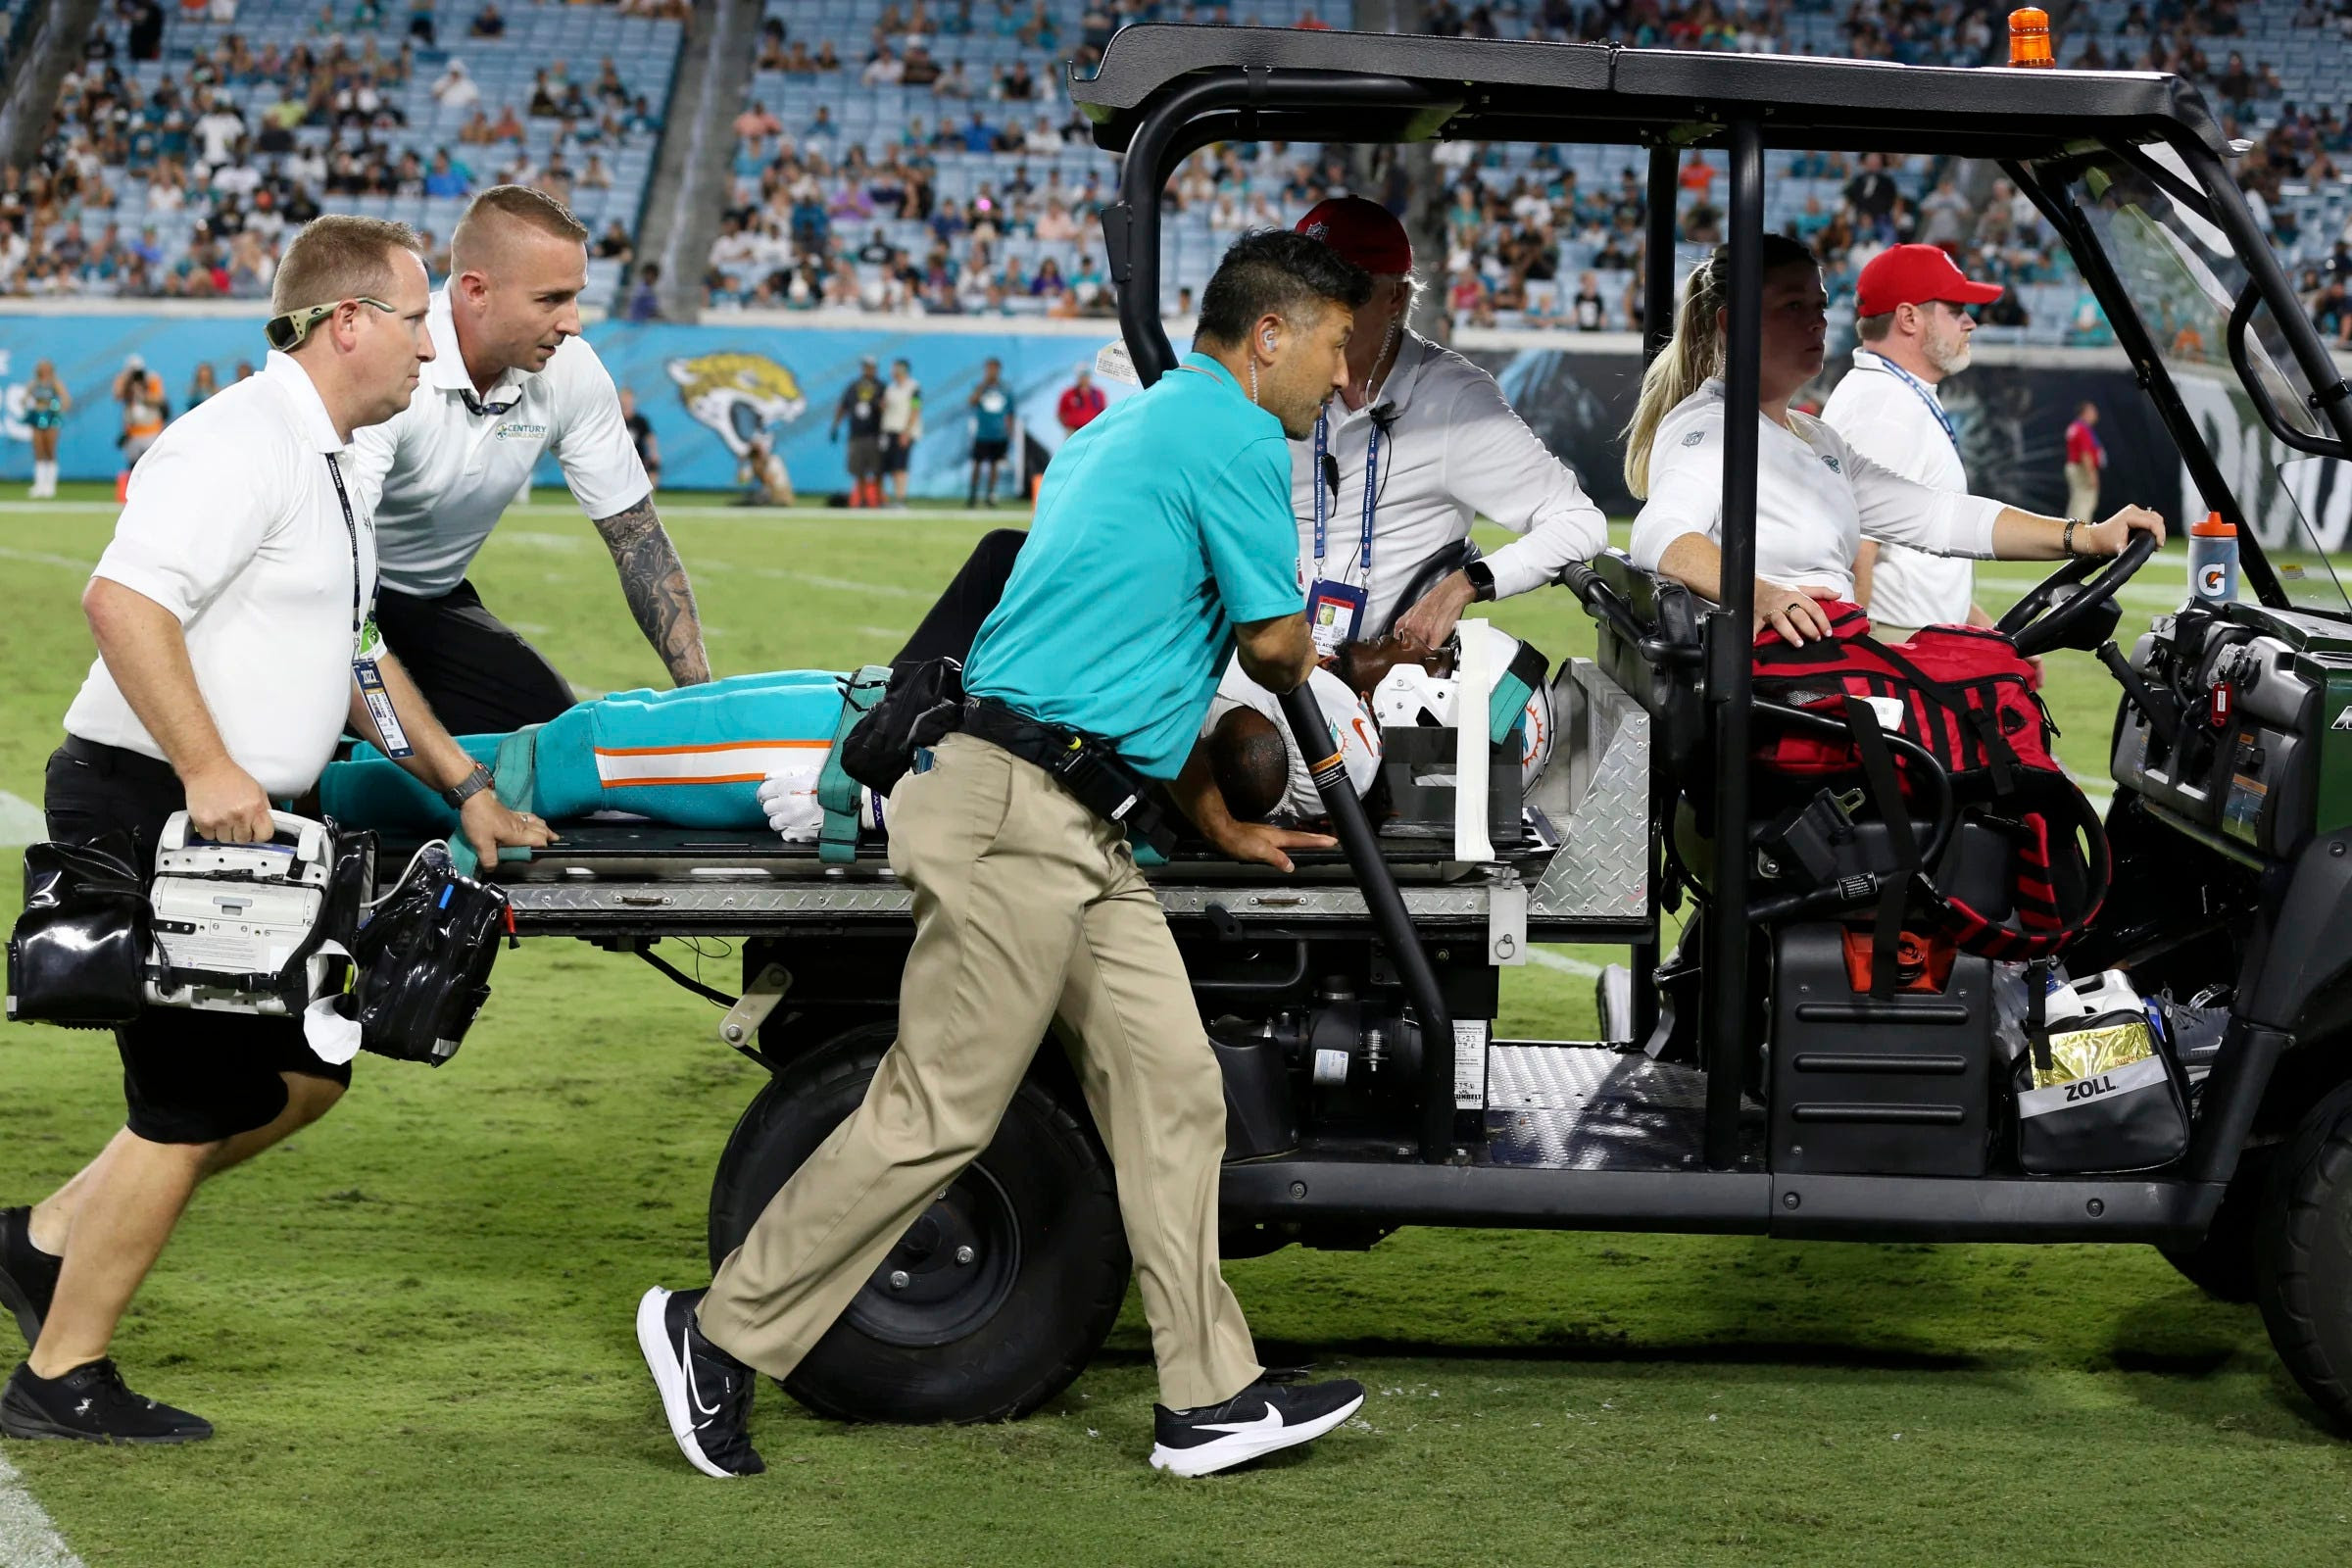 Miami Dolphins wide receiver Daewood Davis is carted off the field during the second half of an NFL preseason football game against the Jacksonville Jaguars, Saturday, Aug. 26, 2023, in Jacksonville, Fla. (AP Photo/Gary McCullough)